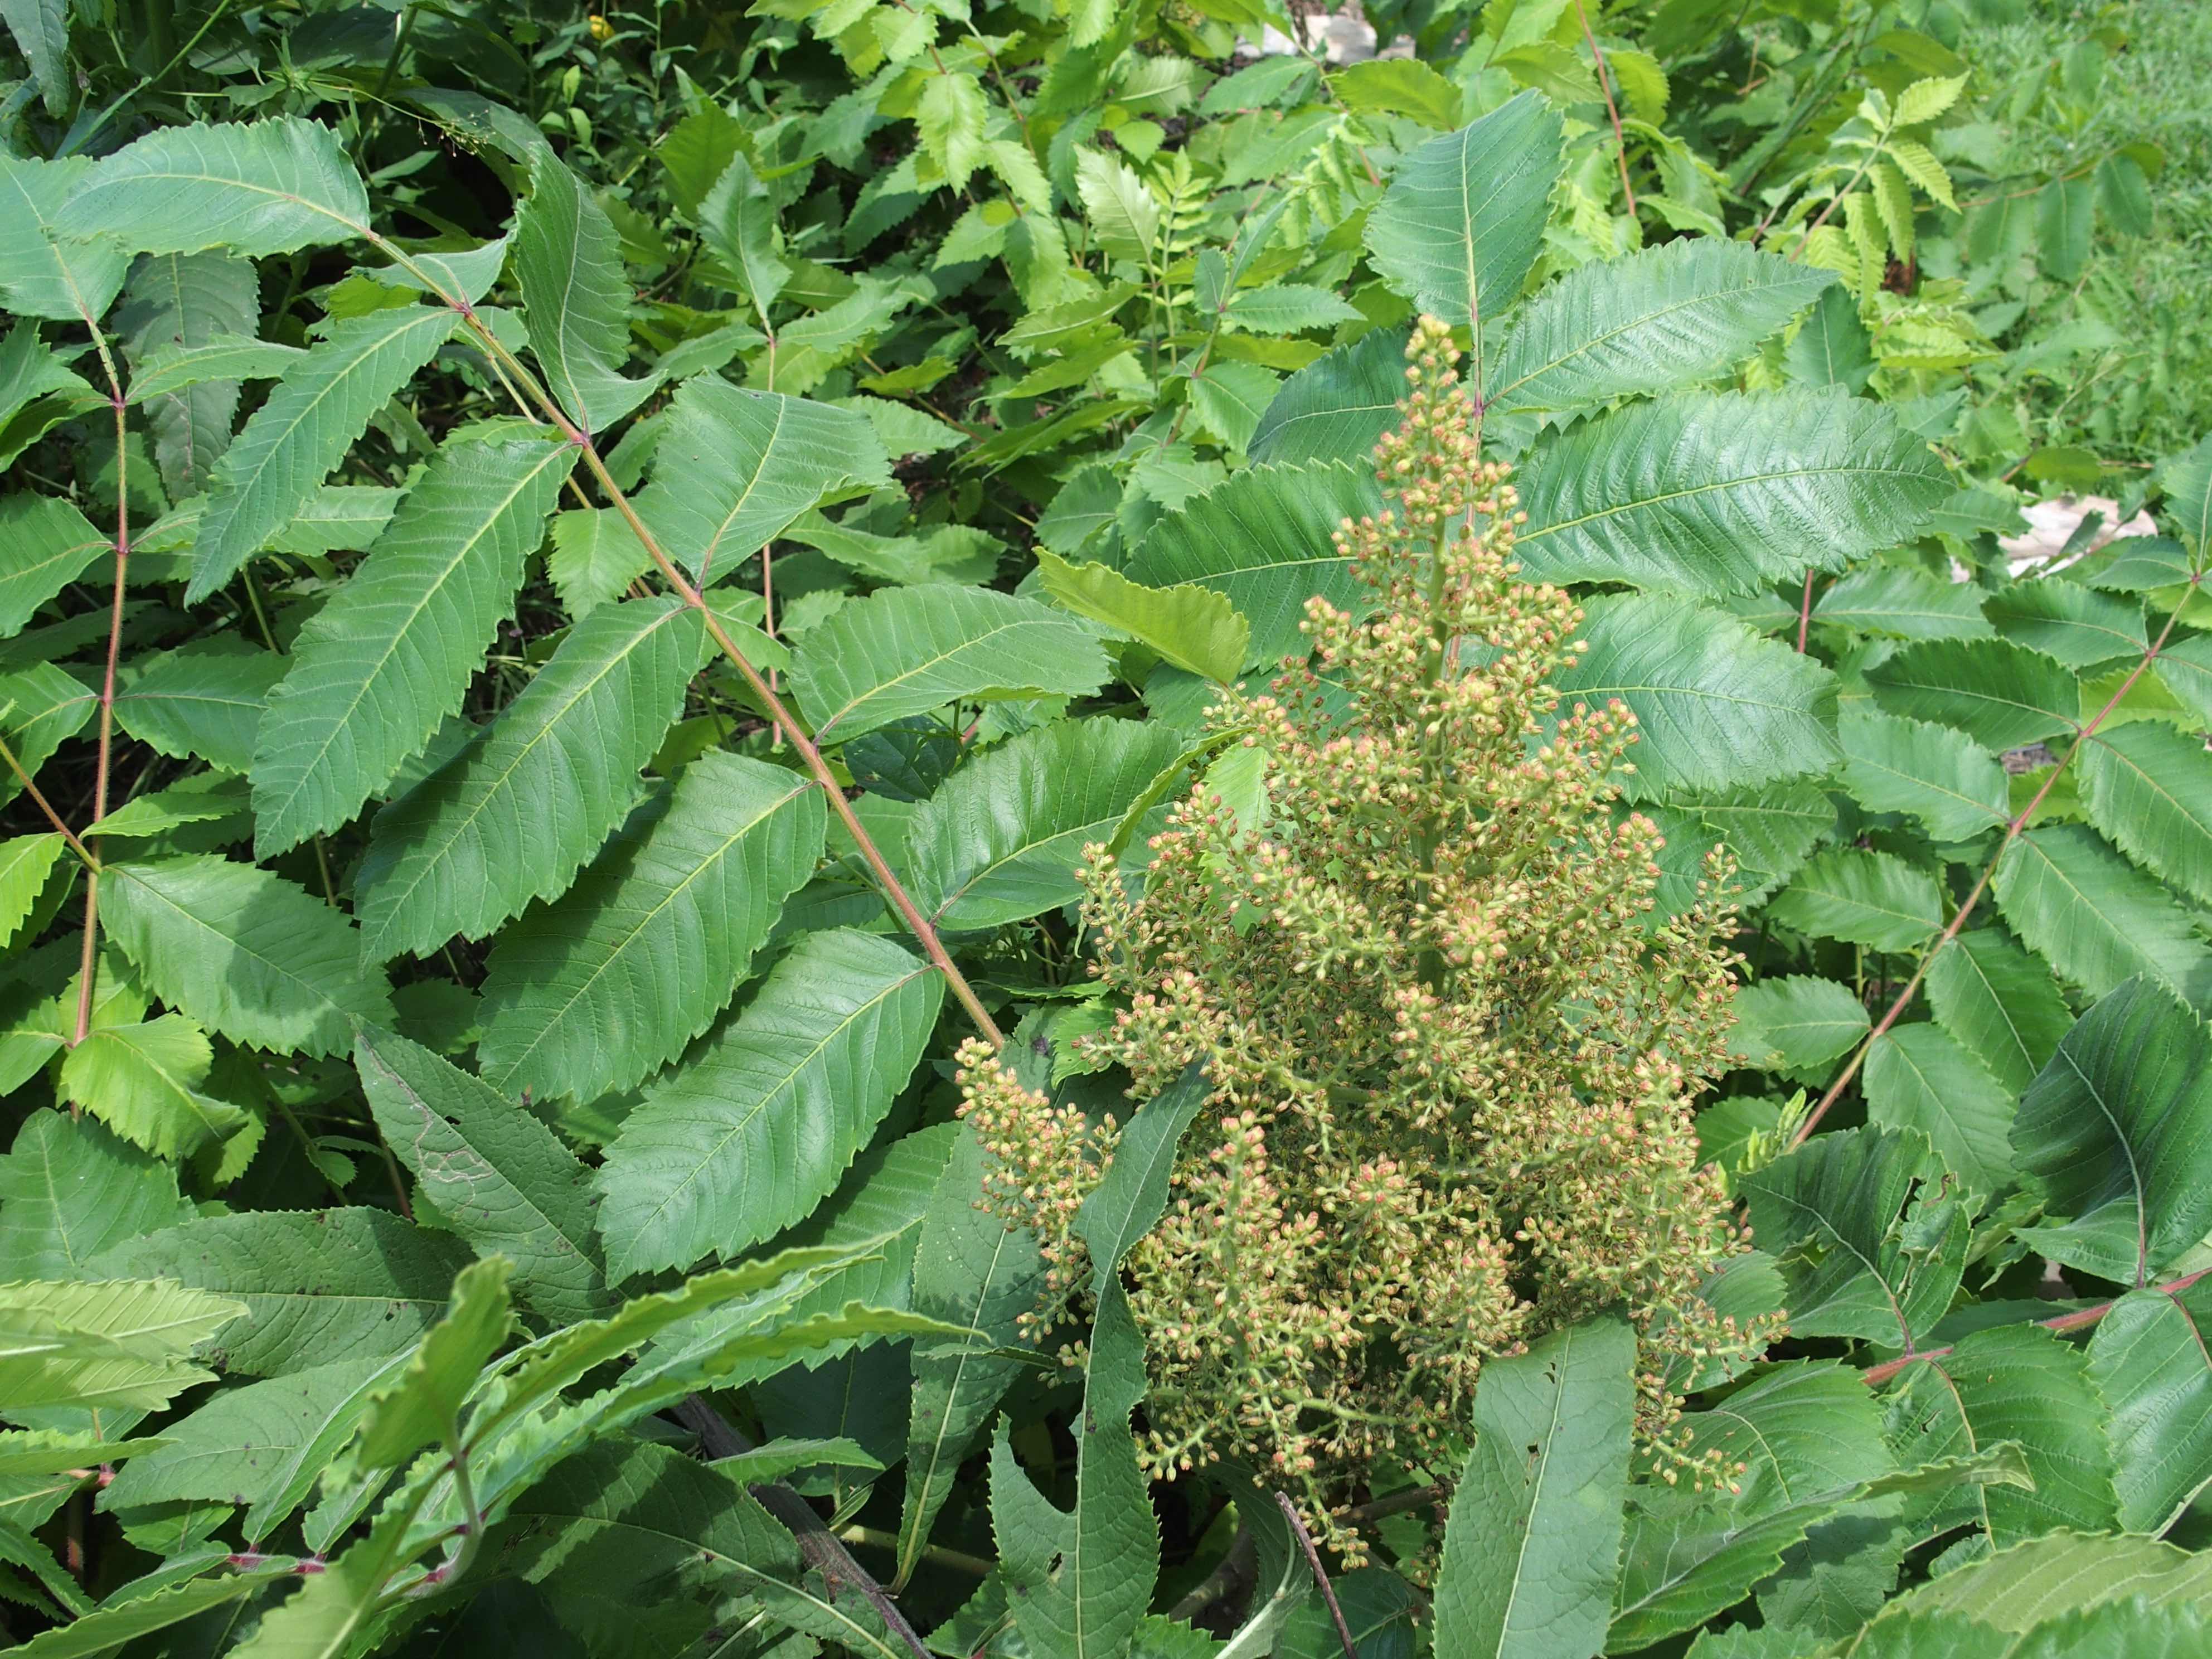 The Scientific Name is Rhus michauxii. You will likely hear them called Michaux's Sumac, Dwarf Sumac, False Poison Sumac. This picture shows the Rare, low, rhizomatous shrub occurring in colonies that are typically composed only of male plants or female plants, but rarely both together. of Rhus michauxii